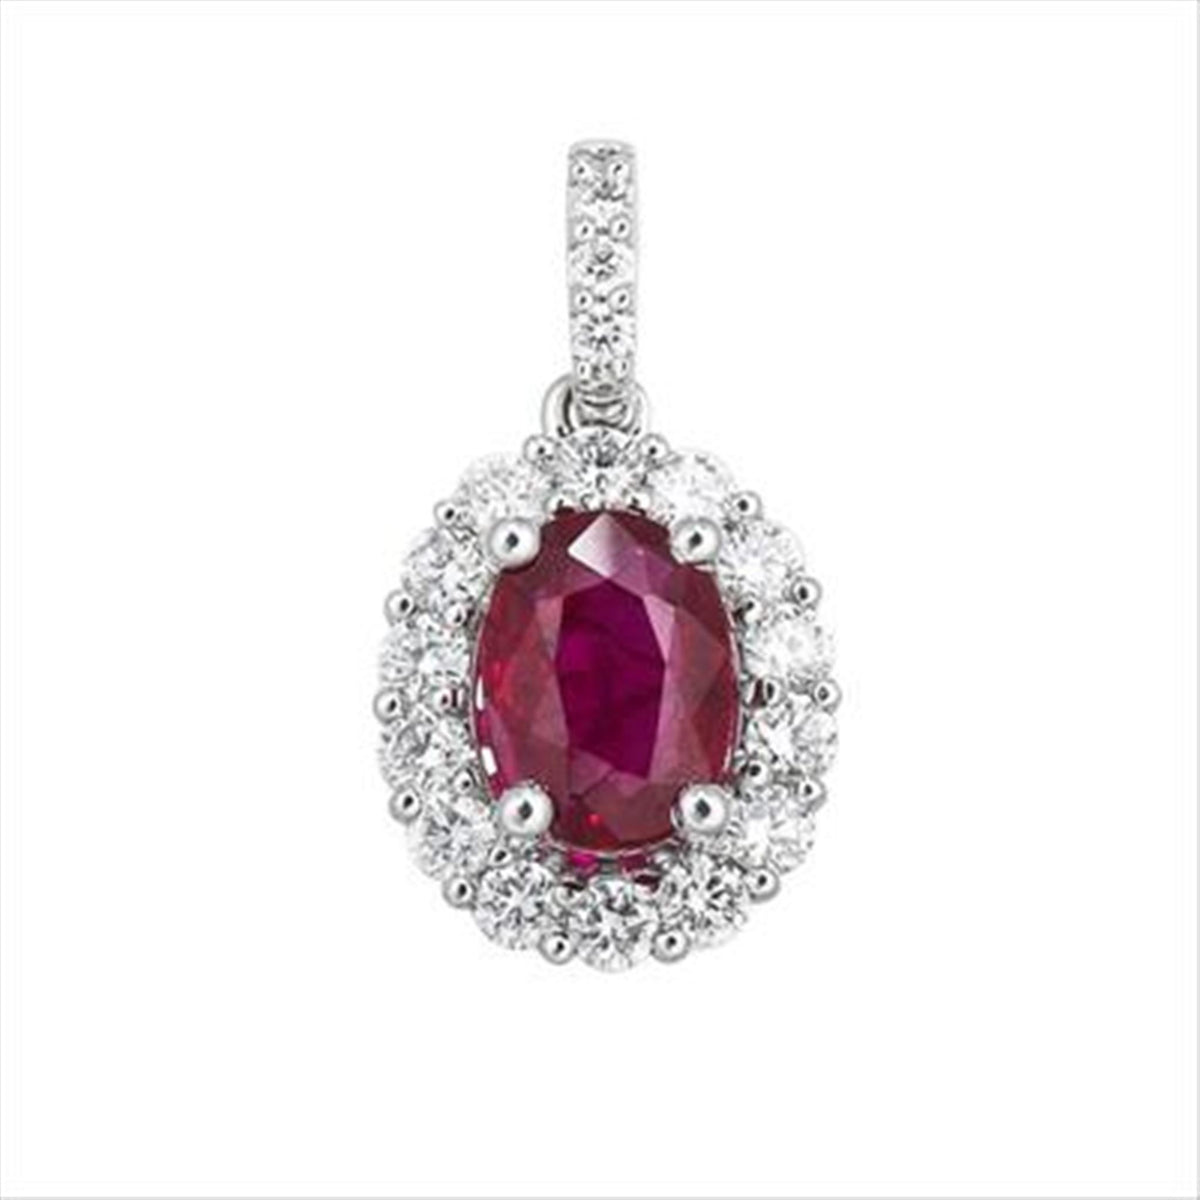 18Kt White Gold Halo Gemstone Pendant With 1.03ct Ruby